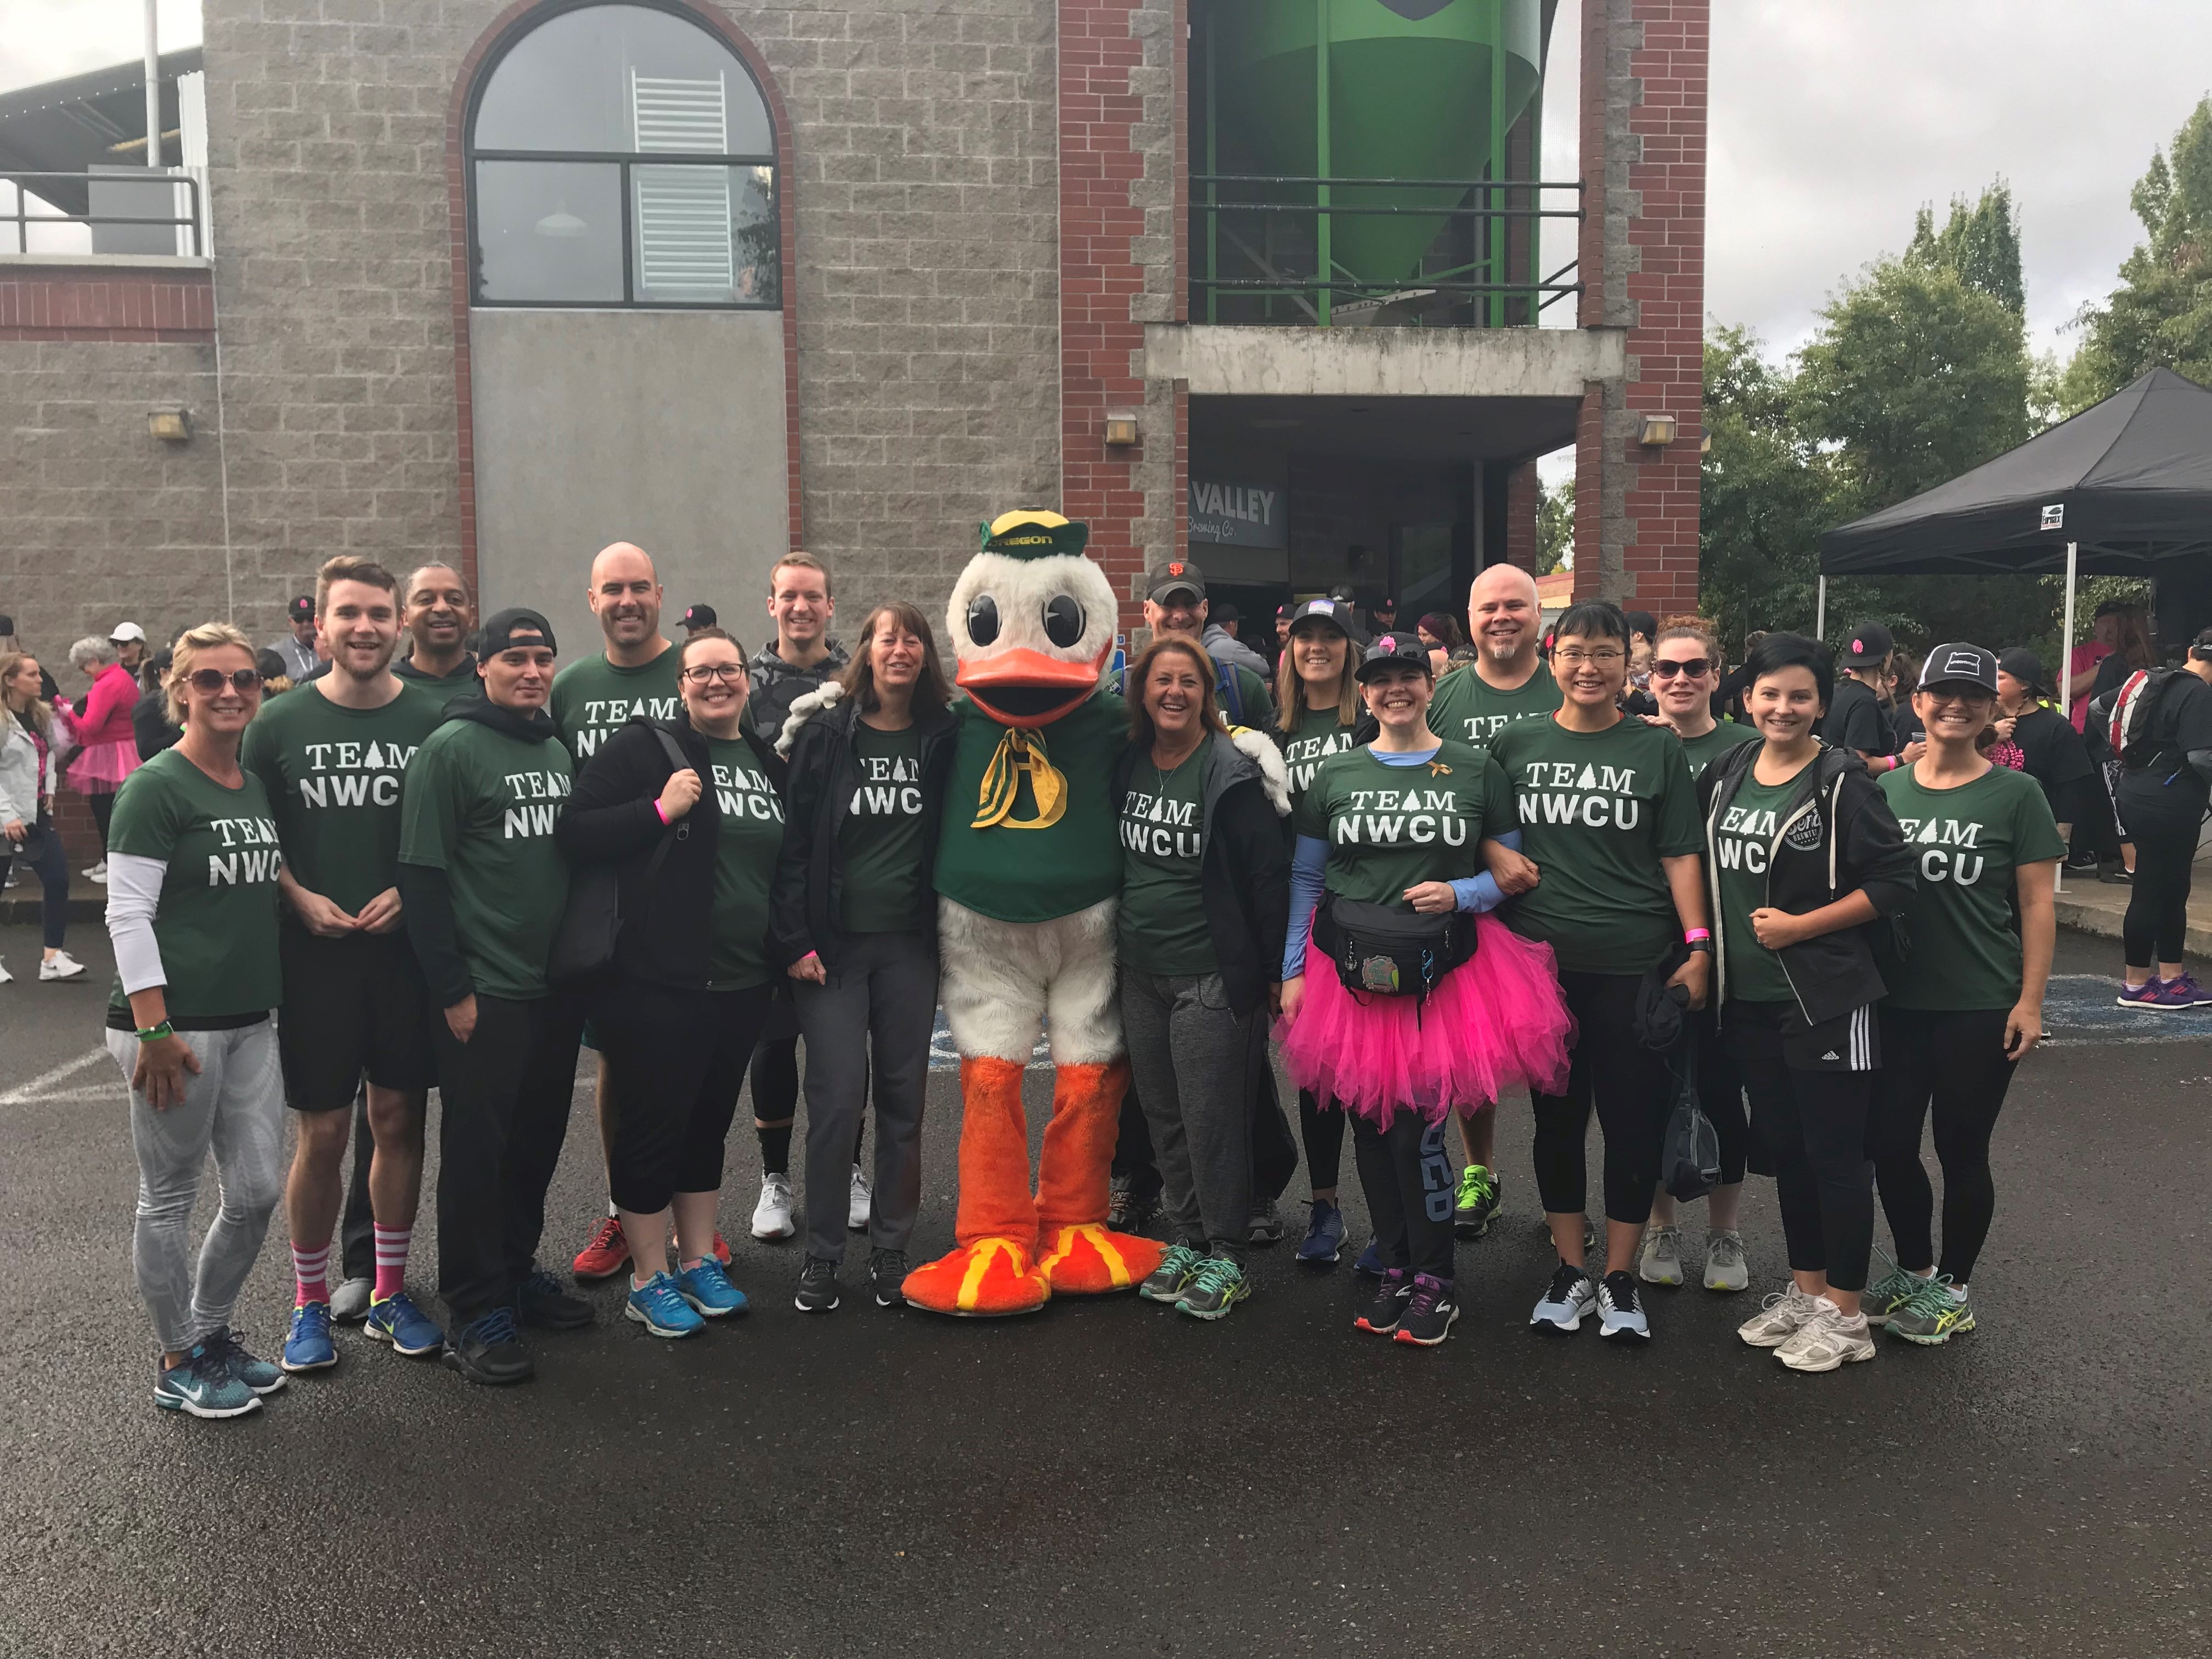 2019 NWCU Team with the Oregon Duck mascot at Hop to Hop